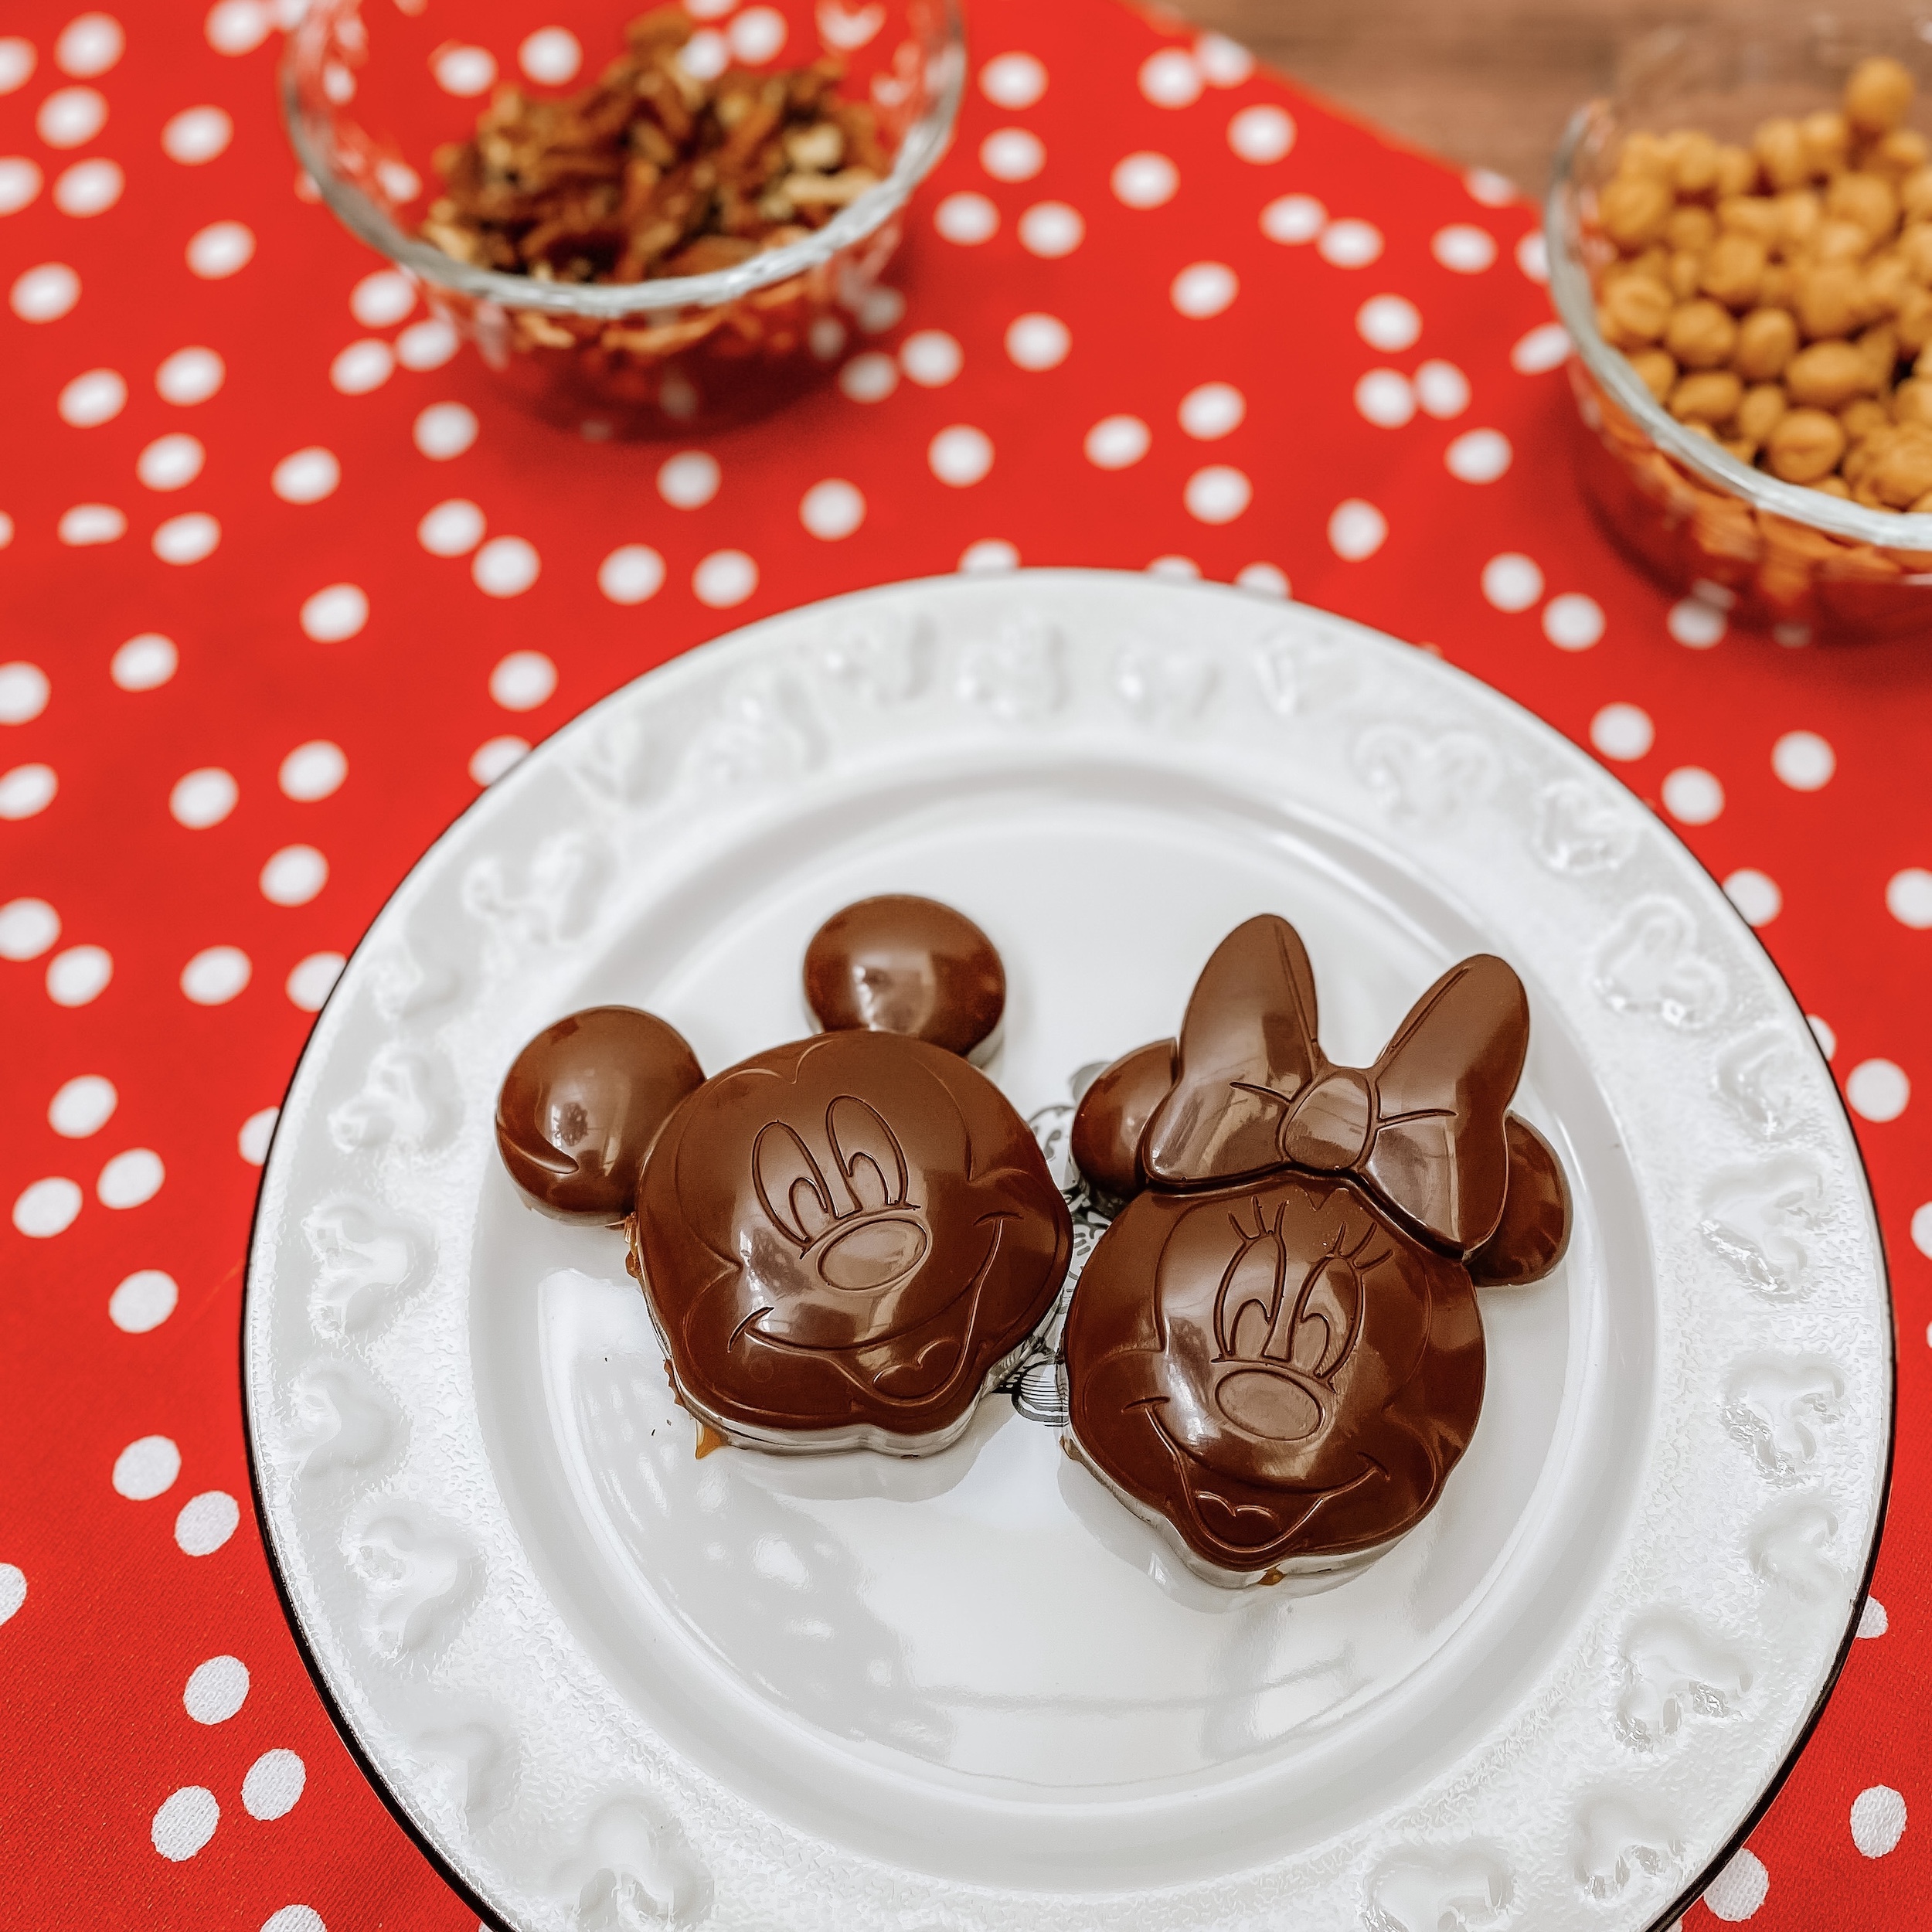 Mickey & Minnie's Turtle Candies (milk chocolate, caramel, and pecans in a mickey shape)